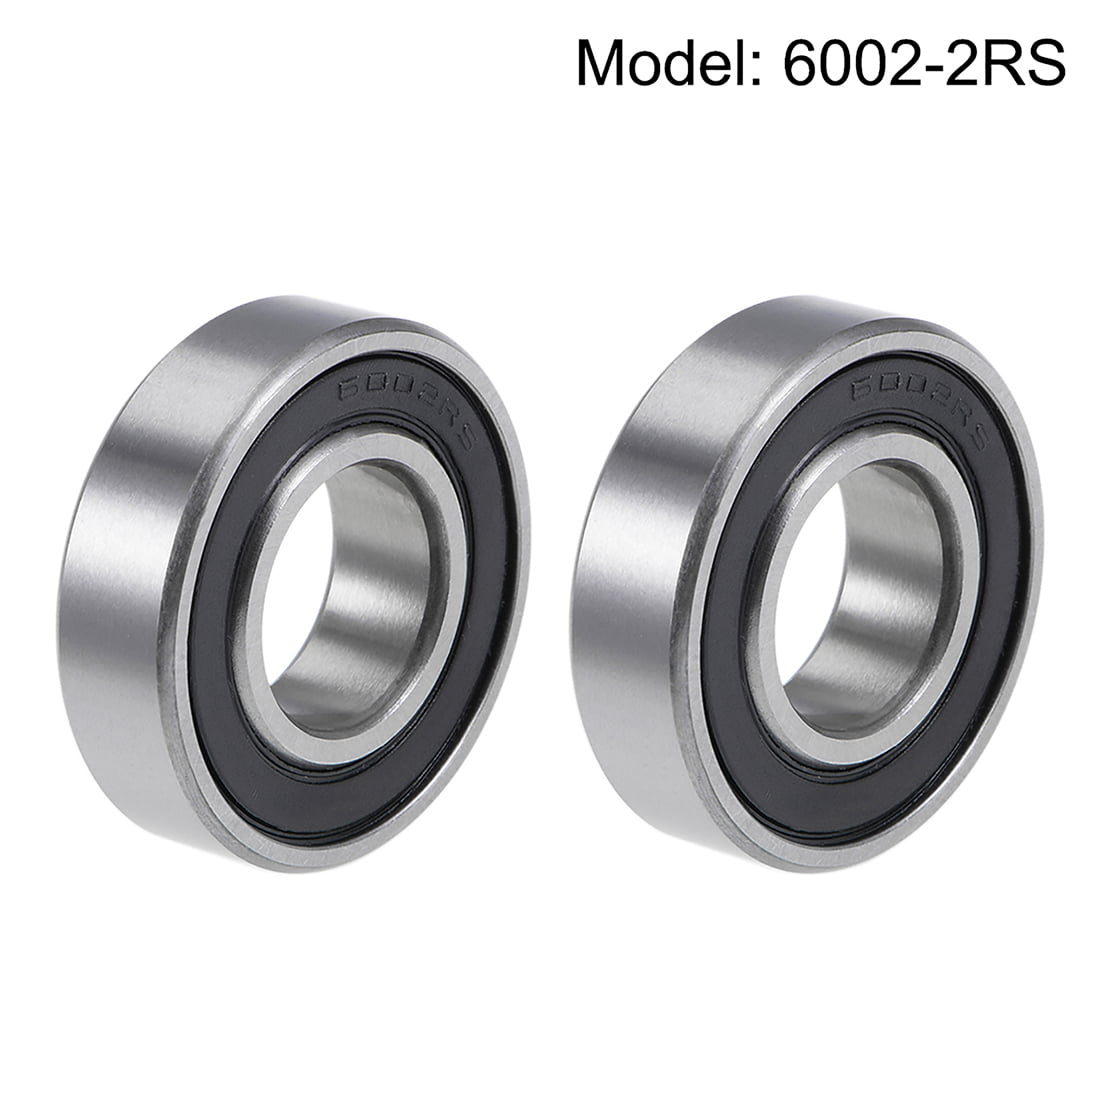 8 Pcs 6002-2RS Double Rubber Seal Bearings 15x32x9mm Deep Groove Ball Bearing 